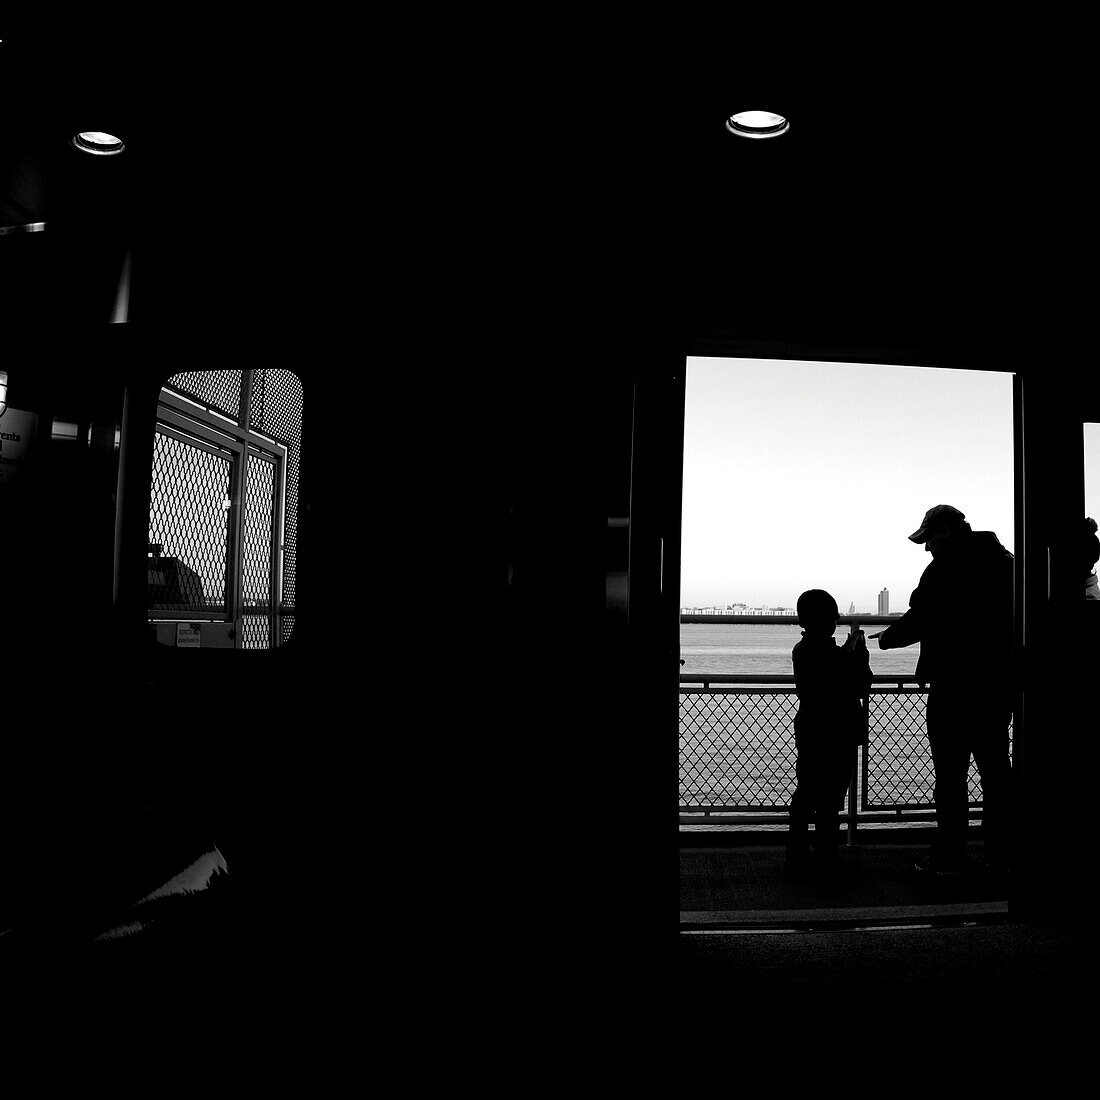 Silouhette of a man & a boy on the ferry in NYC., New York City, NY, USA